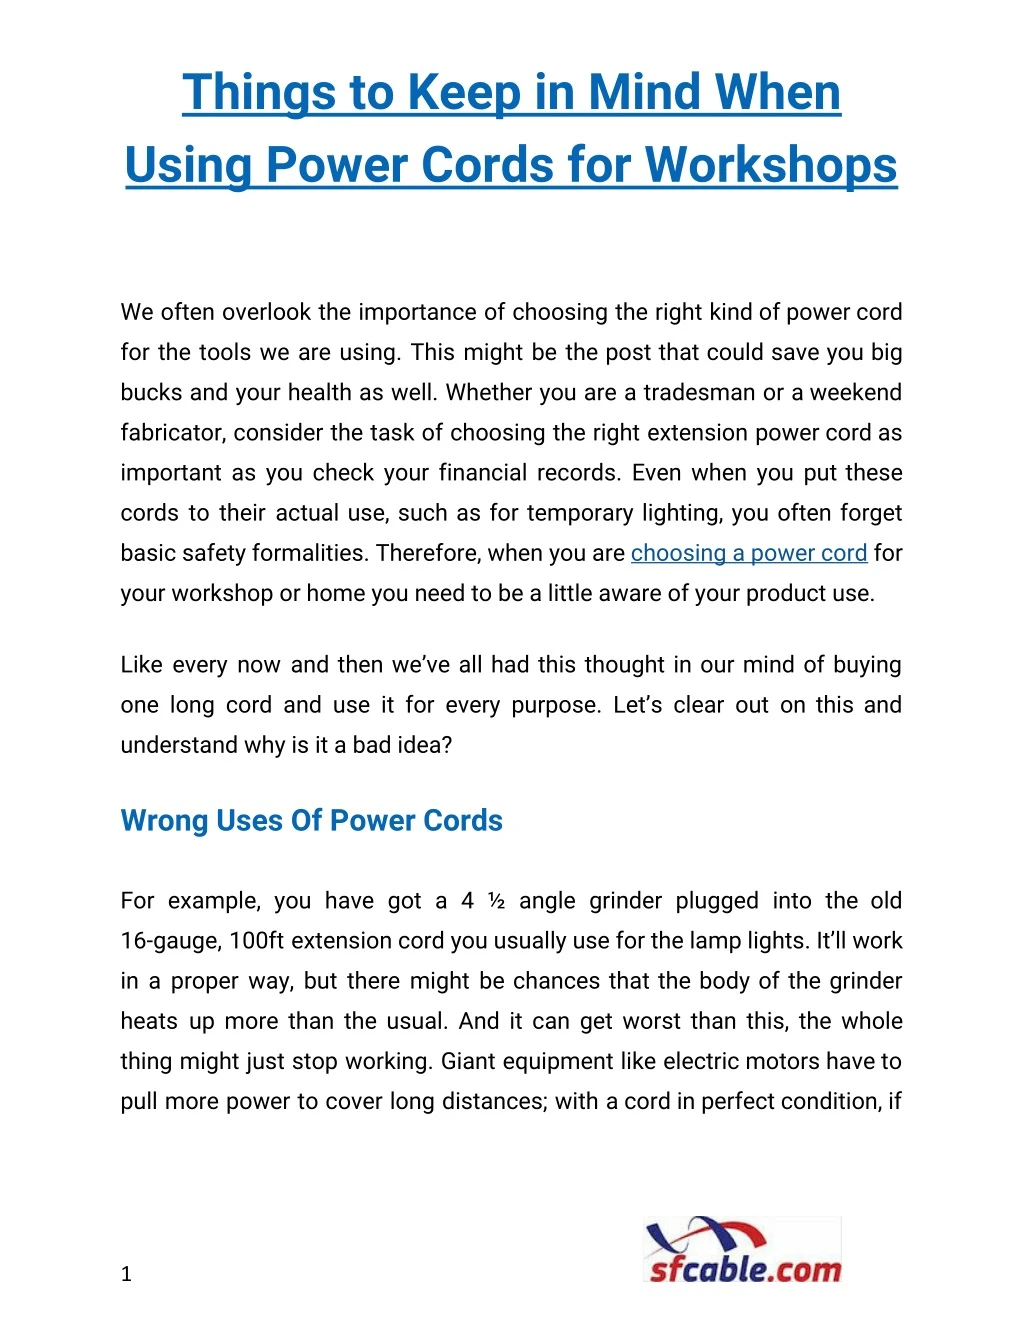 things to keep in mind when using power cords